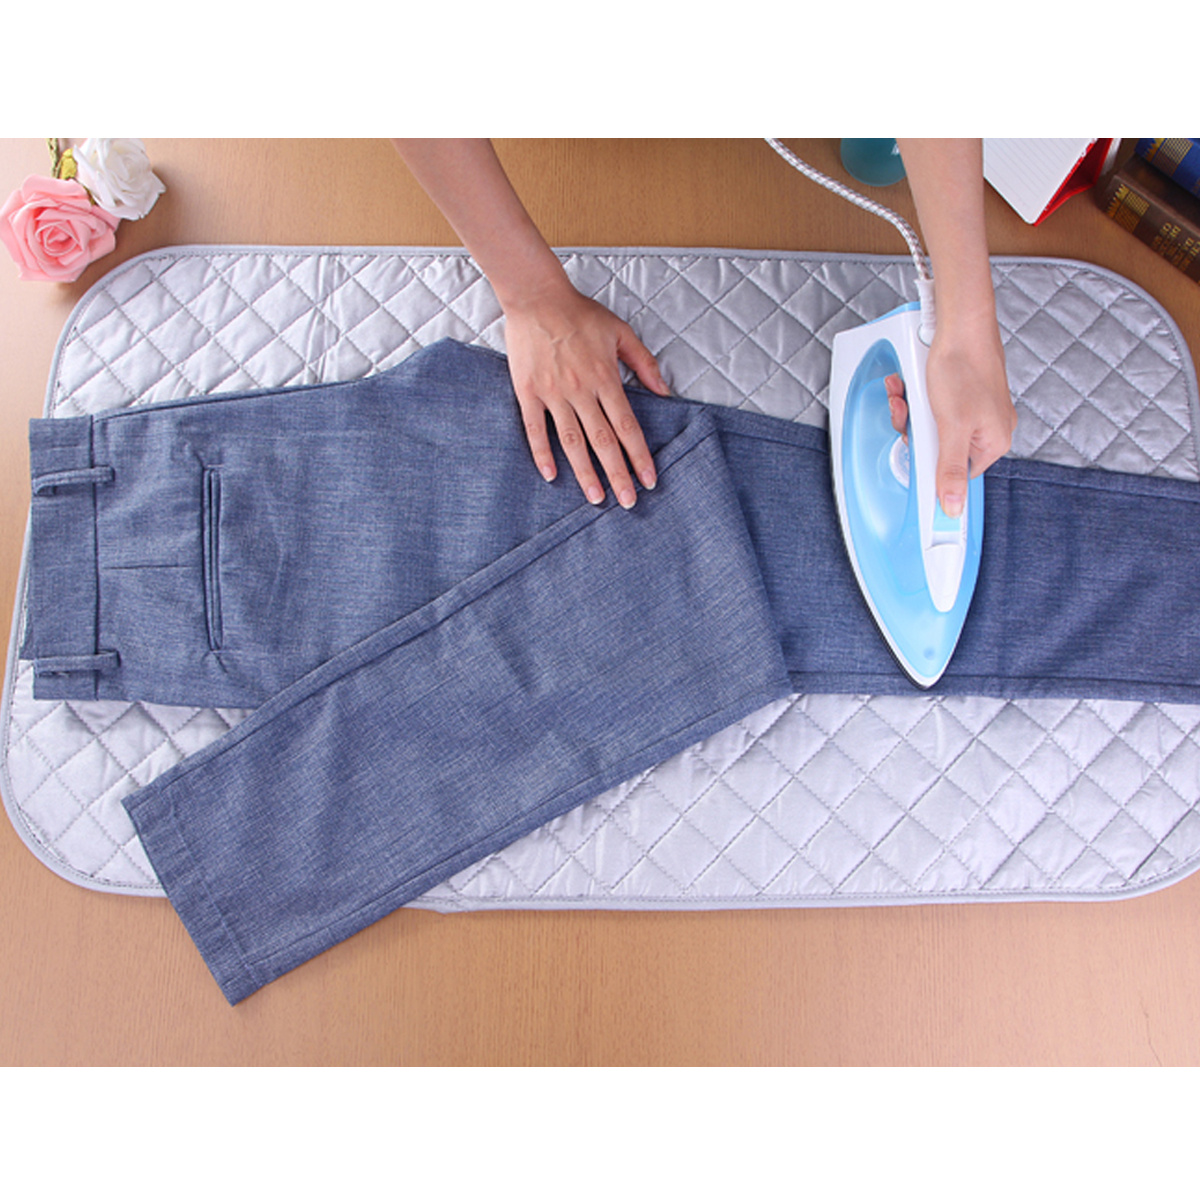  Ironing Mat for Table Top, Ironing Blanket, Portable